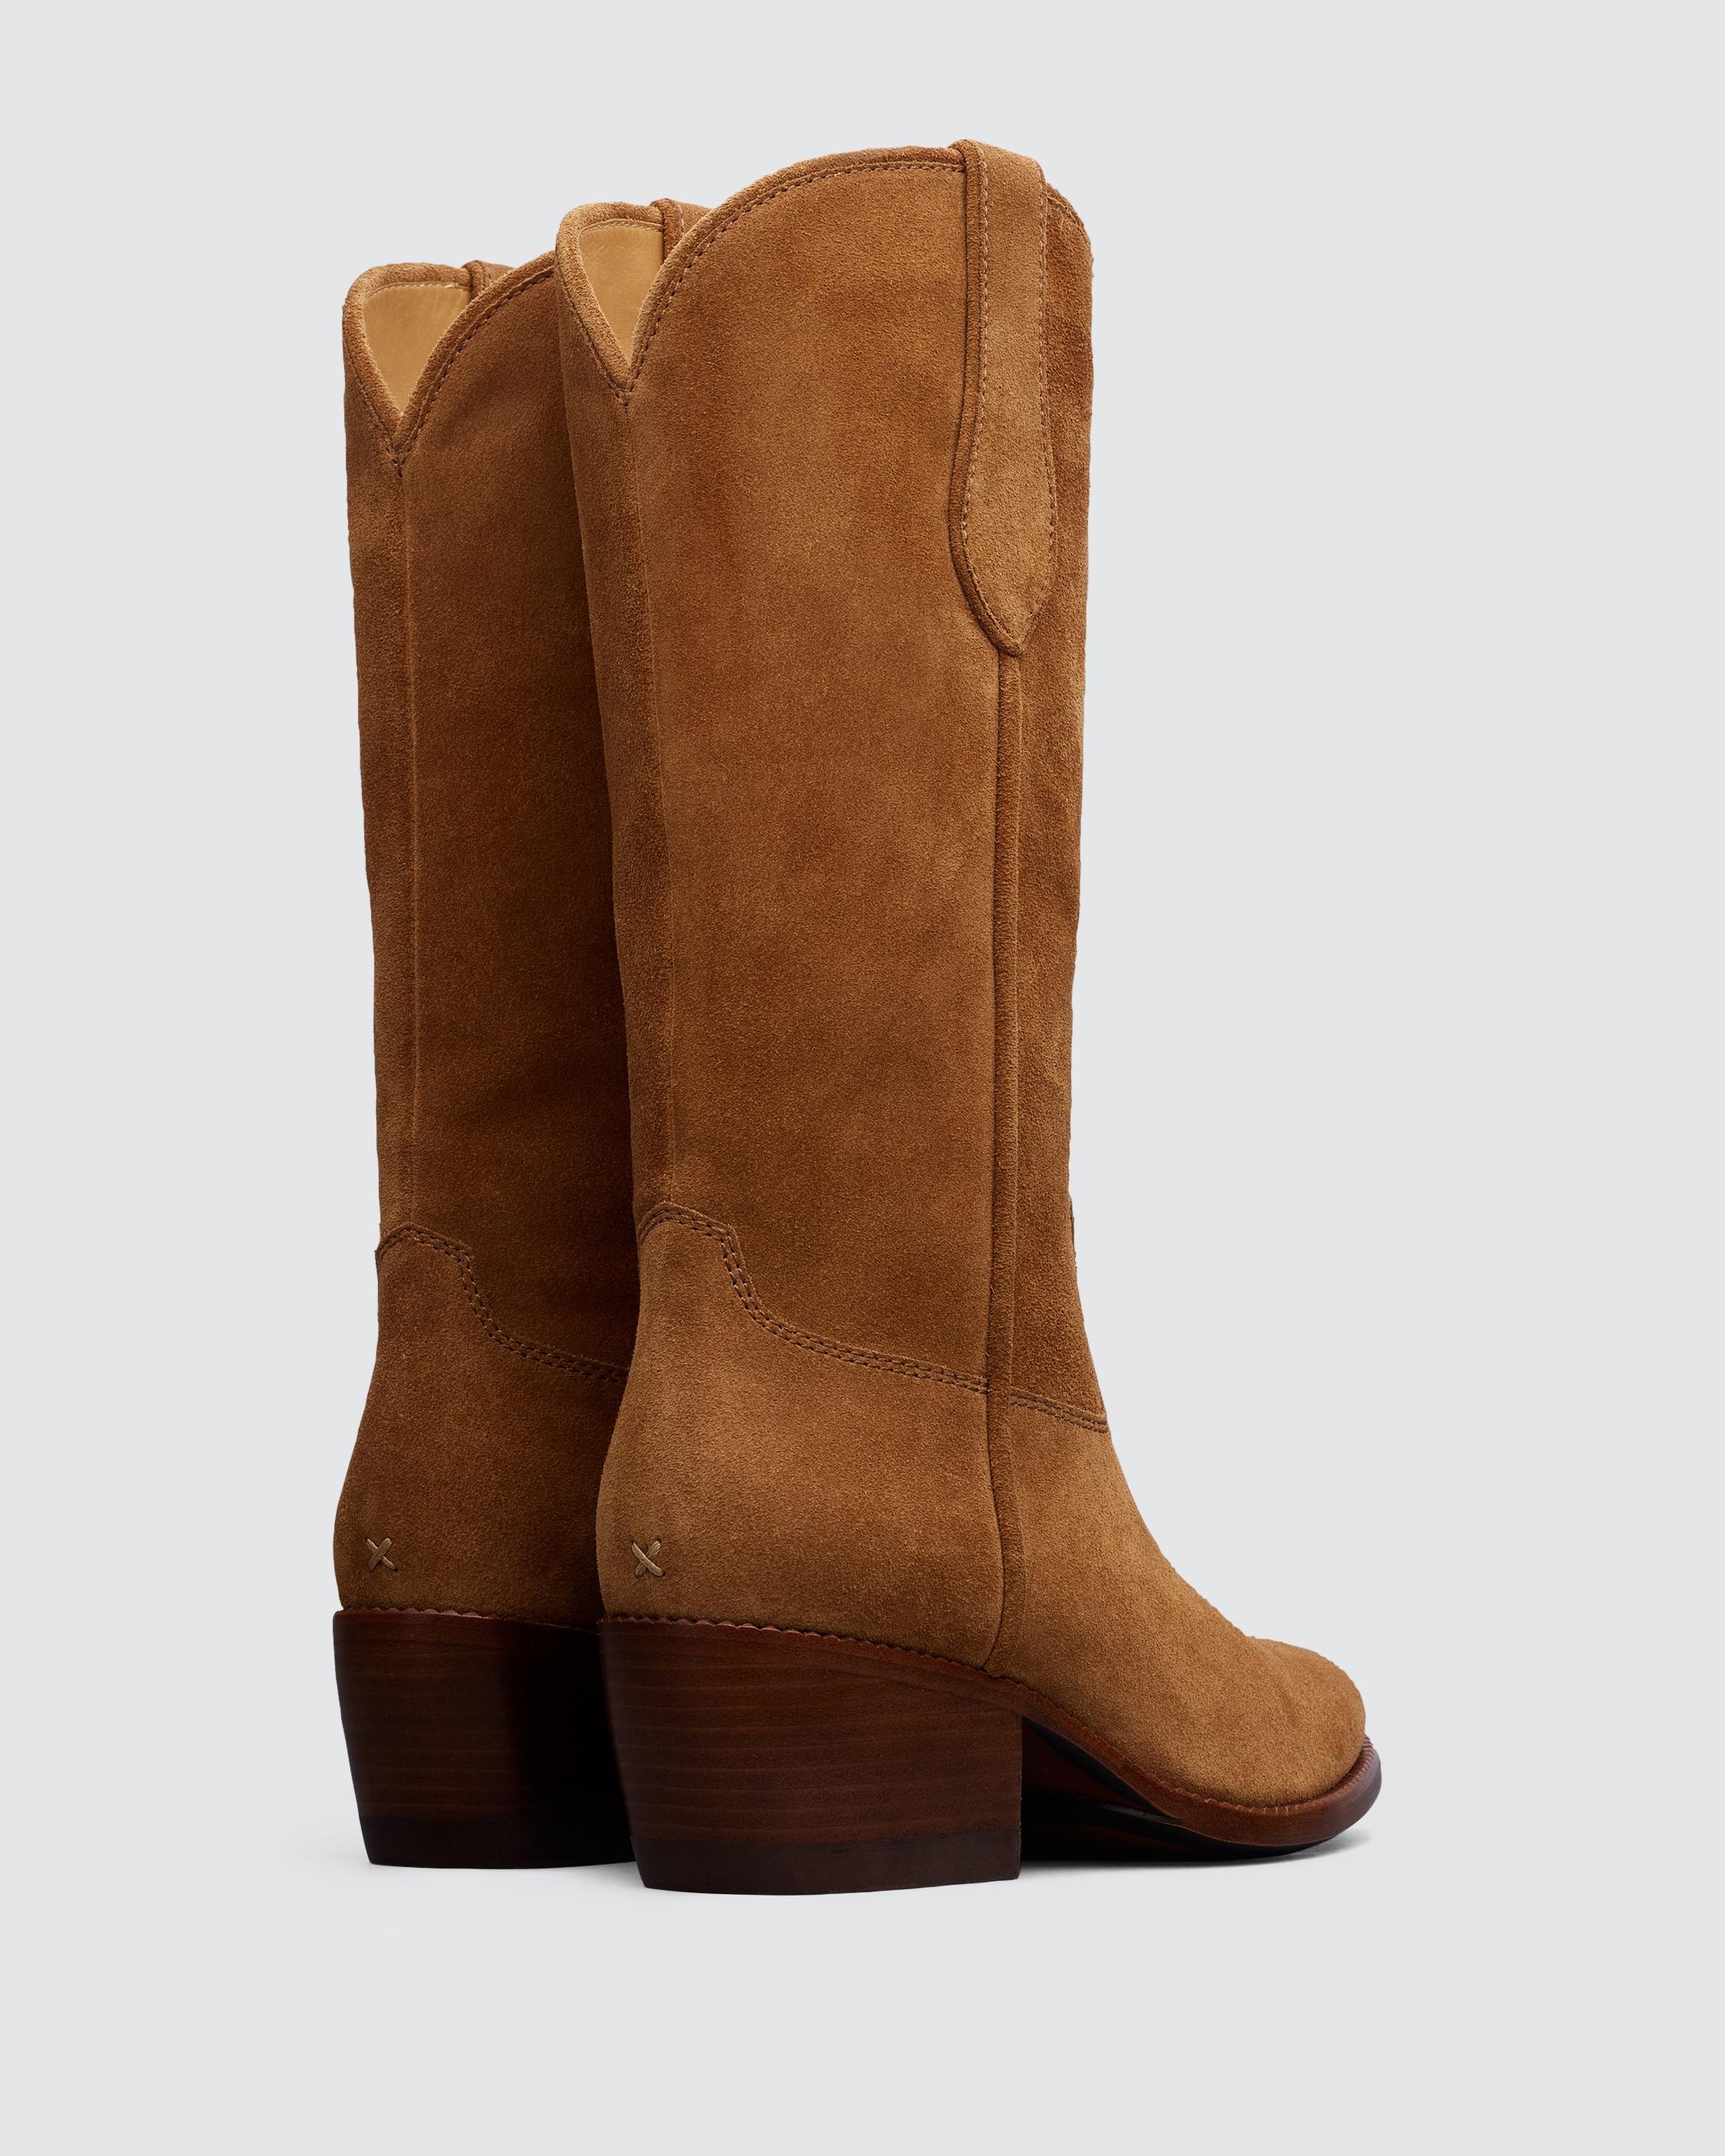 Rb Cowboy Boot - Suede
Heeled Boot - 3